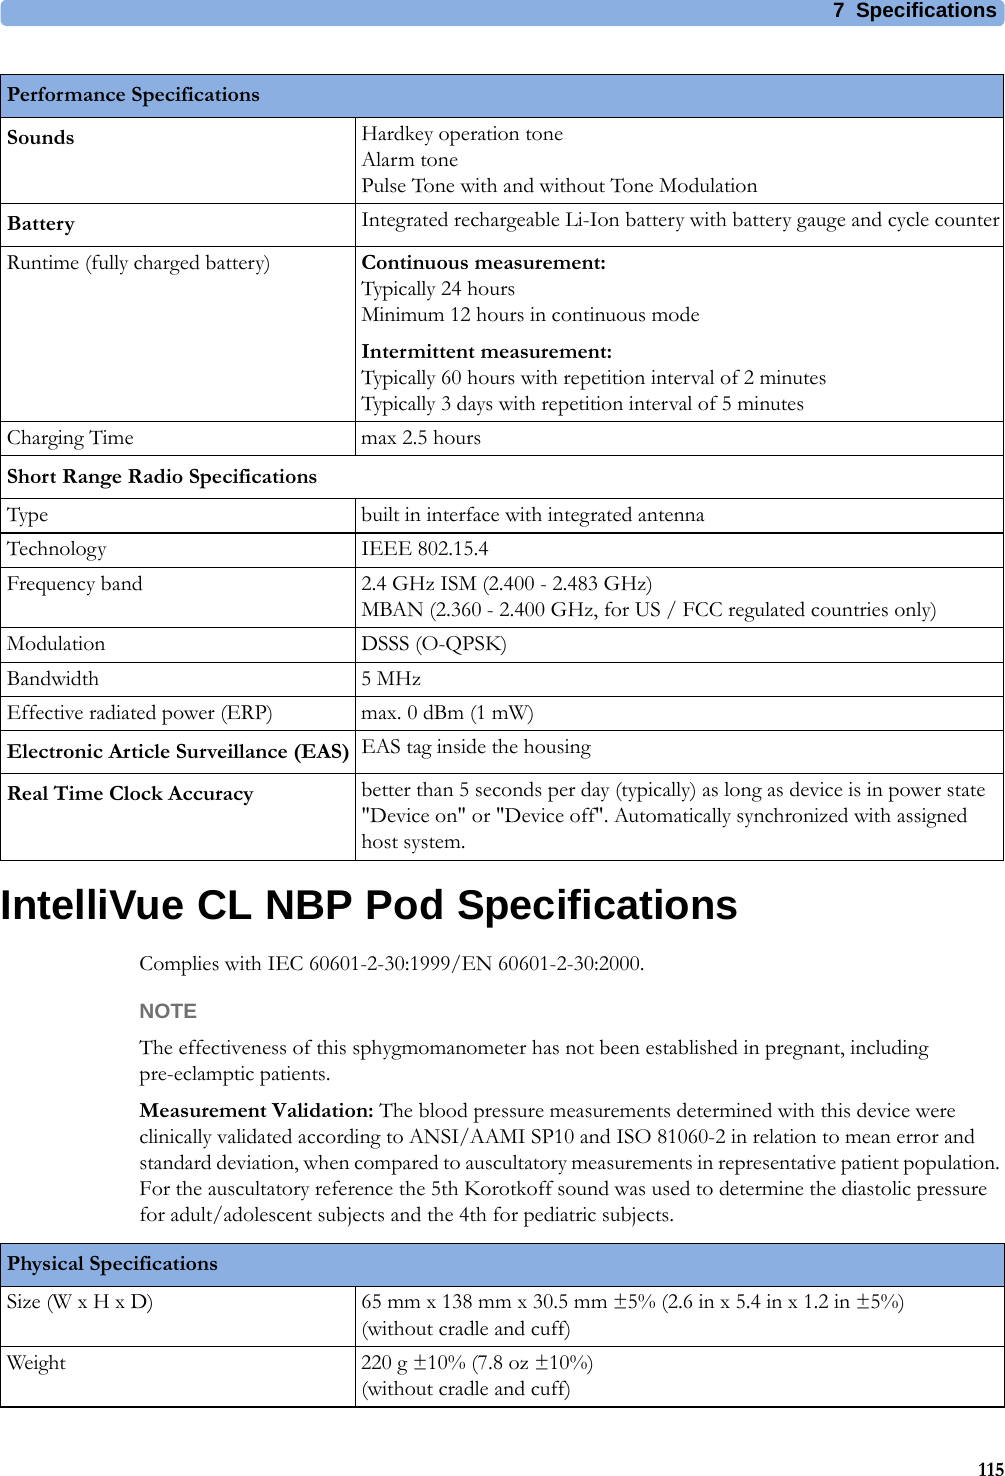 7 Specifications115IntelliVue CL NBP Pod SpecificationsComplies with IEC 60601-2-30:1999/EN 60601-2-30:2000.NOTEThe effectiveness of this sphygmomanometer has not been established in pregnant, including pre-eclamptic patients.Measurement Validation: The blood pressure measurements determined with this device were clinically validated according to ANSI/AAMI SP10 and ISO 81060-2 in relation to mean error and standard deviation, when compared to auscultatory measurements in representative patient population. For the auscultatory reference the 5th Korotkoff sound was used to determine the diastolic pressure for adult/adolescent subjects and the 4th for pediatric subjects.Sounds Hardkey operation toneAlarm tonePulse Tone with and without Tone ModulationBattery Integrated rechargeable Li-Ion battery with battery gauge and cycle counterRuntime (fully charged battery) Continuous measurement:Typically 24 hoursMinimum 12 hours in continuous modeIntermittent measurement:Typically 60 hours with repetition interval of 2 minutesTypically 3 days with repetition interval of 5 minutesCharging Time max 2.5 hoursShort Range Radio SpecificationsType built in interface with integrated antennaTechnology IEEE 802.15.4Frequency band 2.4 GHz ISM (2.400 - 2.483 GHz)MBAN (2.360 - 2.400 GHz, for US / FCC regulated countries only)Modulation DSSS (O-QPSK)Bandwidth 5 MHzEffective radiated power (ERP) max. 0 dBm (1 mW)Electronic Article Surveillance (EAS) EAS tag inside the housingReal Time Clock Accuracy better than 5 seconds per day (typically) as long as device is in power state &quot;Device on&quot; or &quot;Device off&quot;. Automatically synchronized with assigned host system.Performance SpecificationsPhysical SpecificationsSize (W x H x D) 65 mm x 138 mm x 30.5 mm ±5% (2.6 in x 5.4 in x 1.2 in ±5%)(without cradle and cuff)Weight 220 g ±10% (7.8 oz ±10%)(without cradle and cuff)